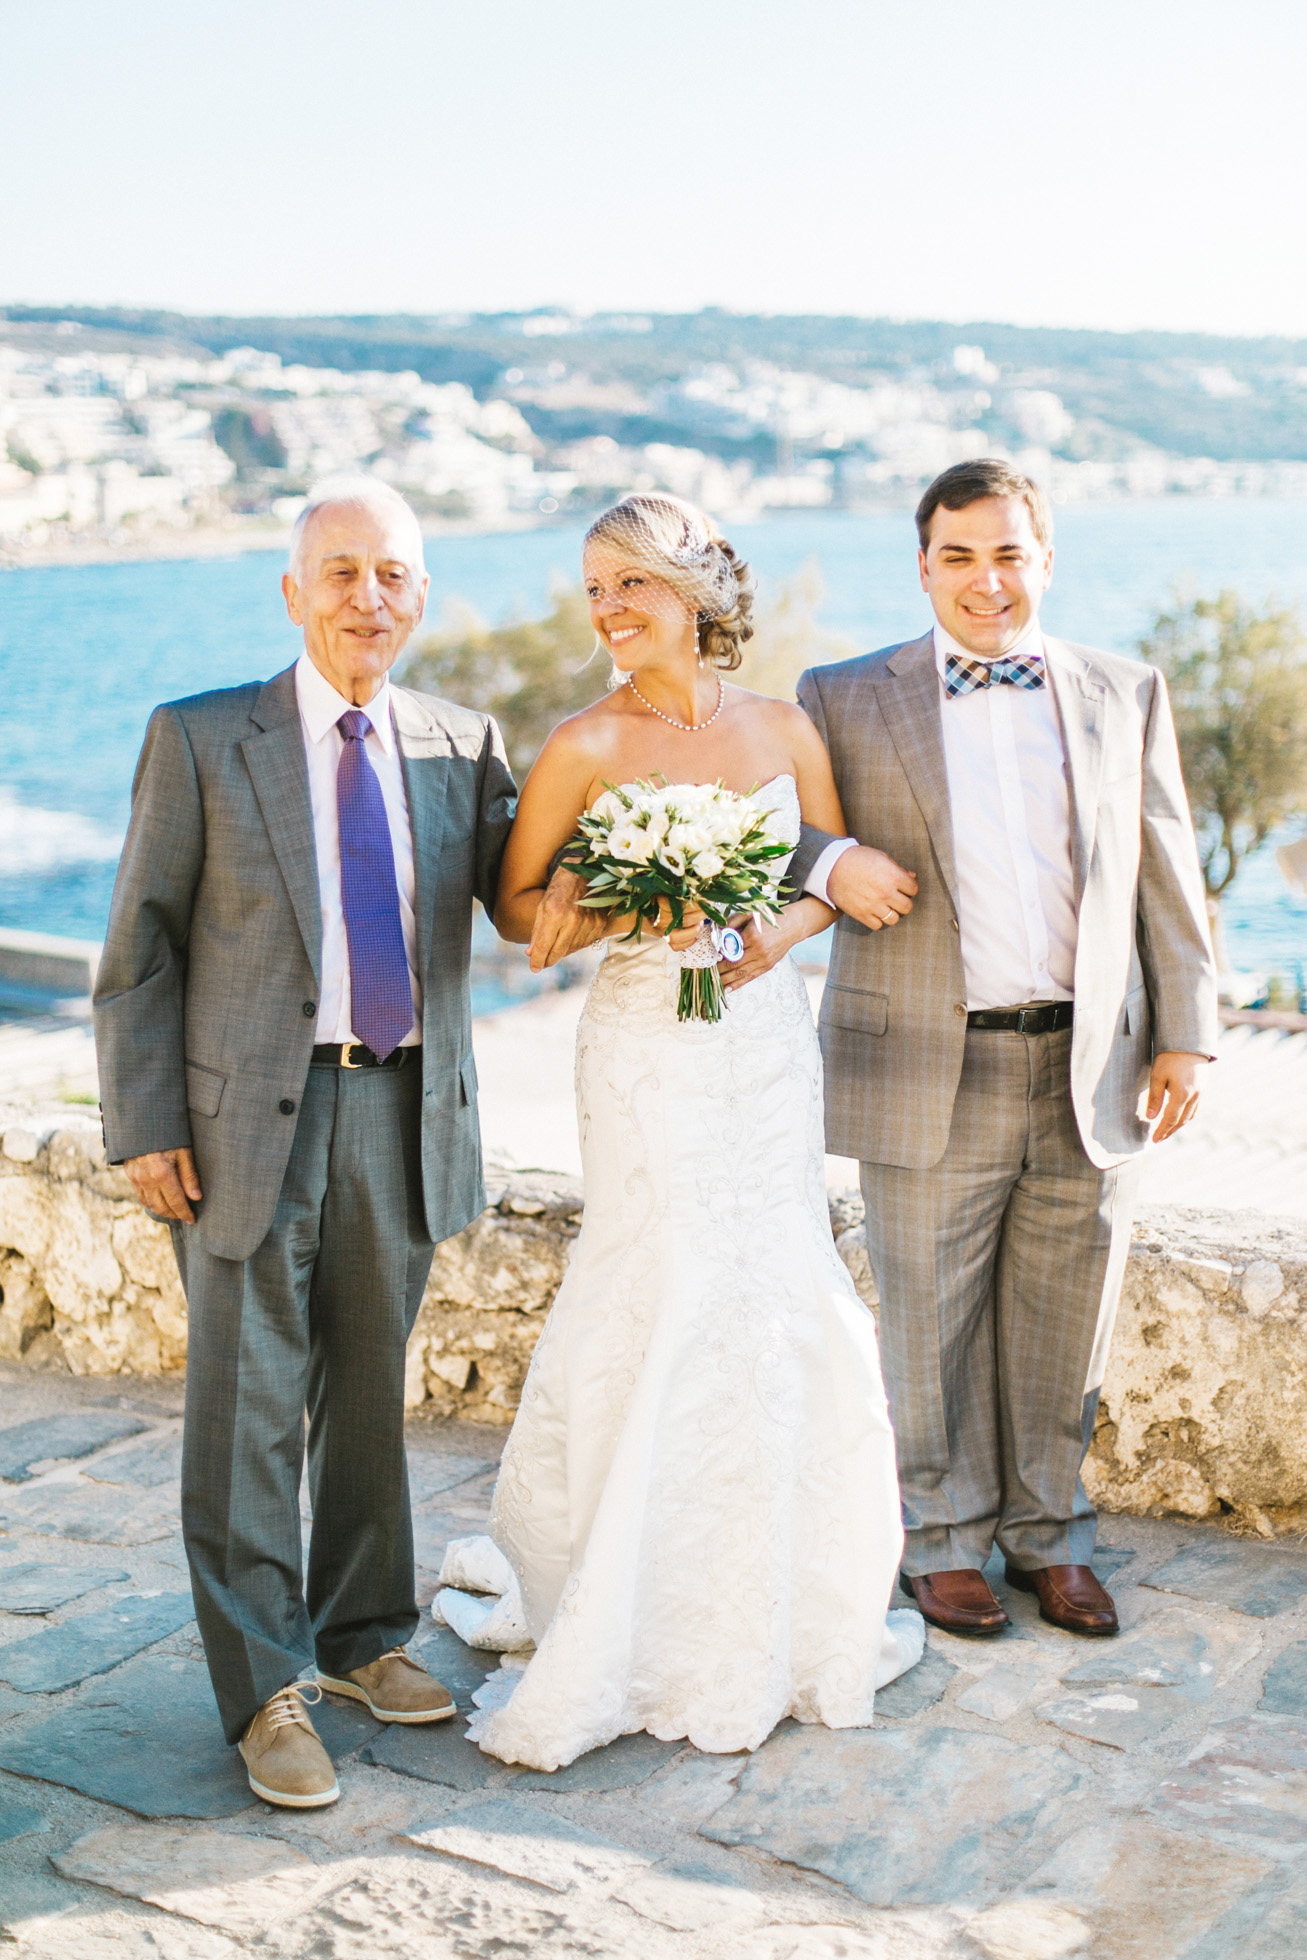 Greek orthodox wedding ceremony documentary of a Canadian couple who decided to have their destination wedding held in Rethymno in the island of Crete.